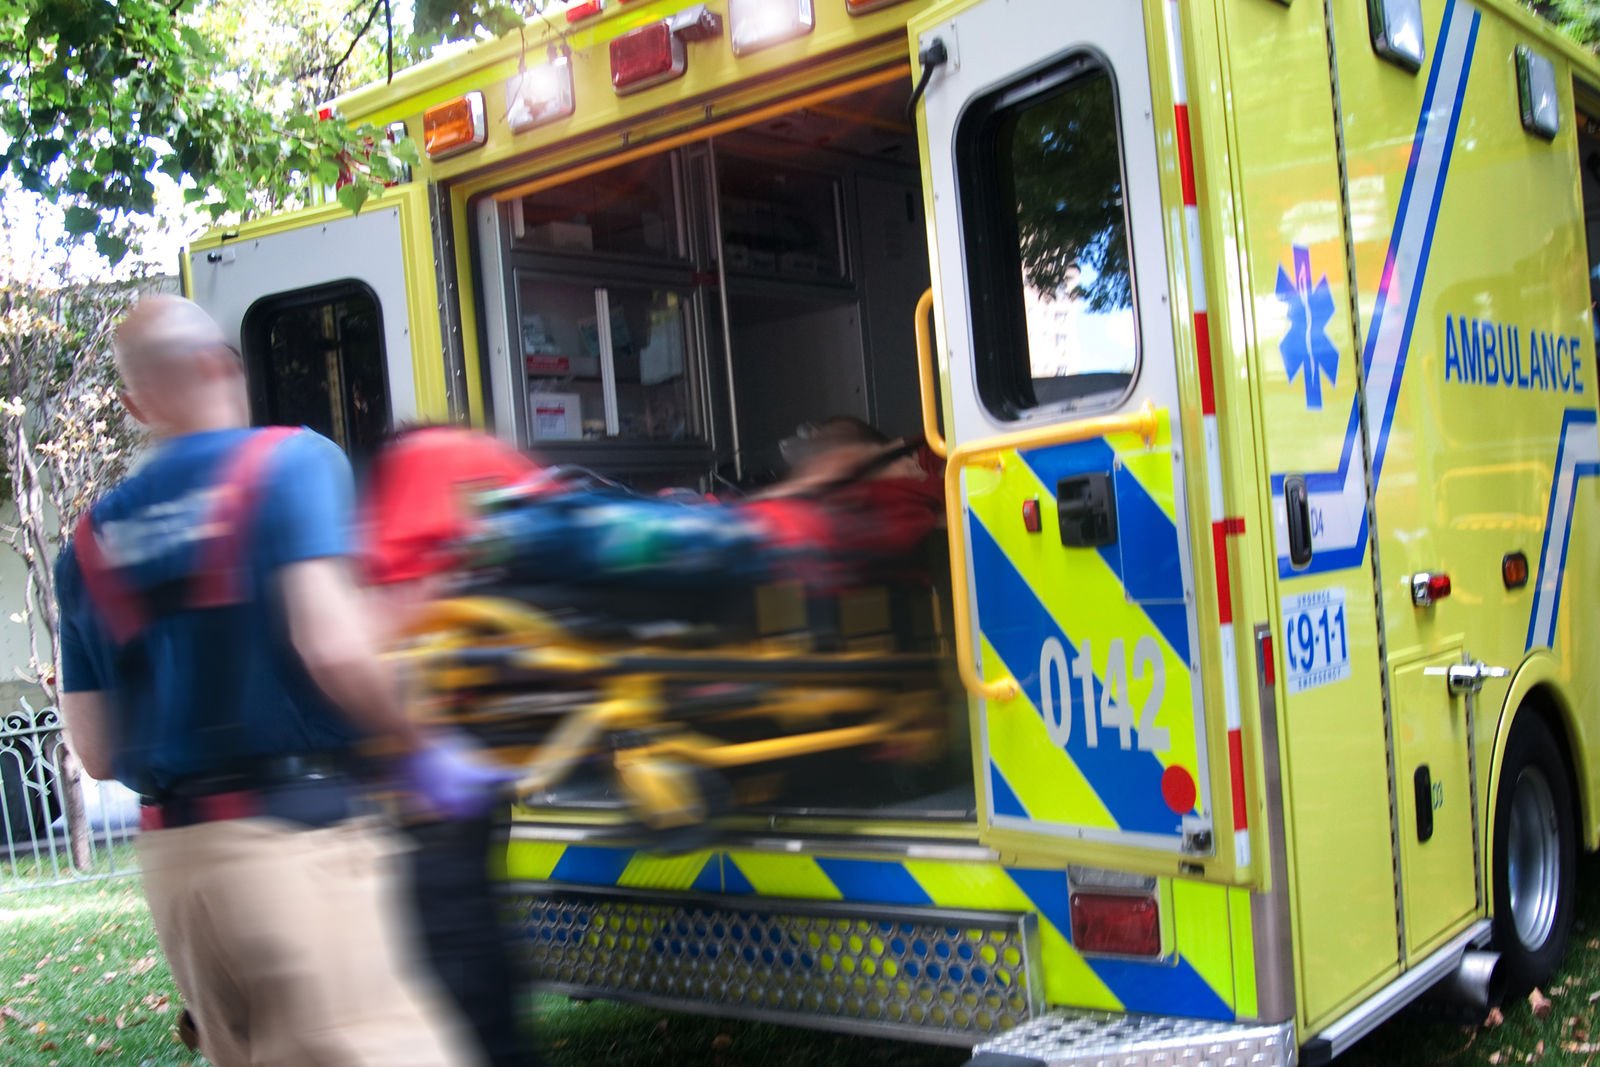 Does auto insurance cover ambulance rides?